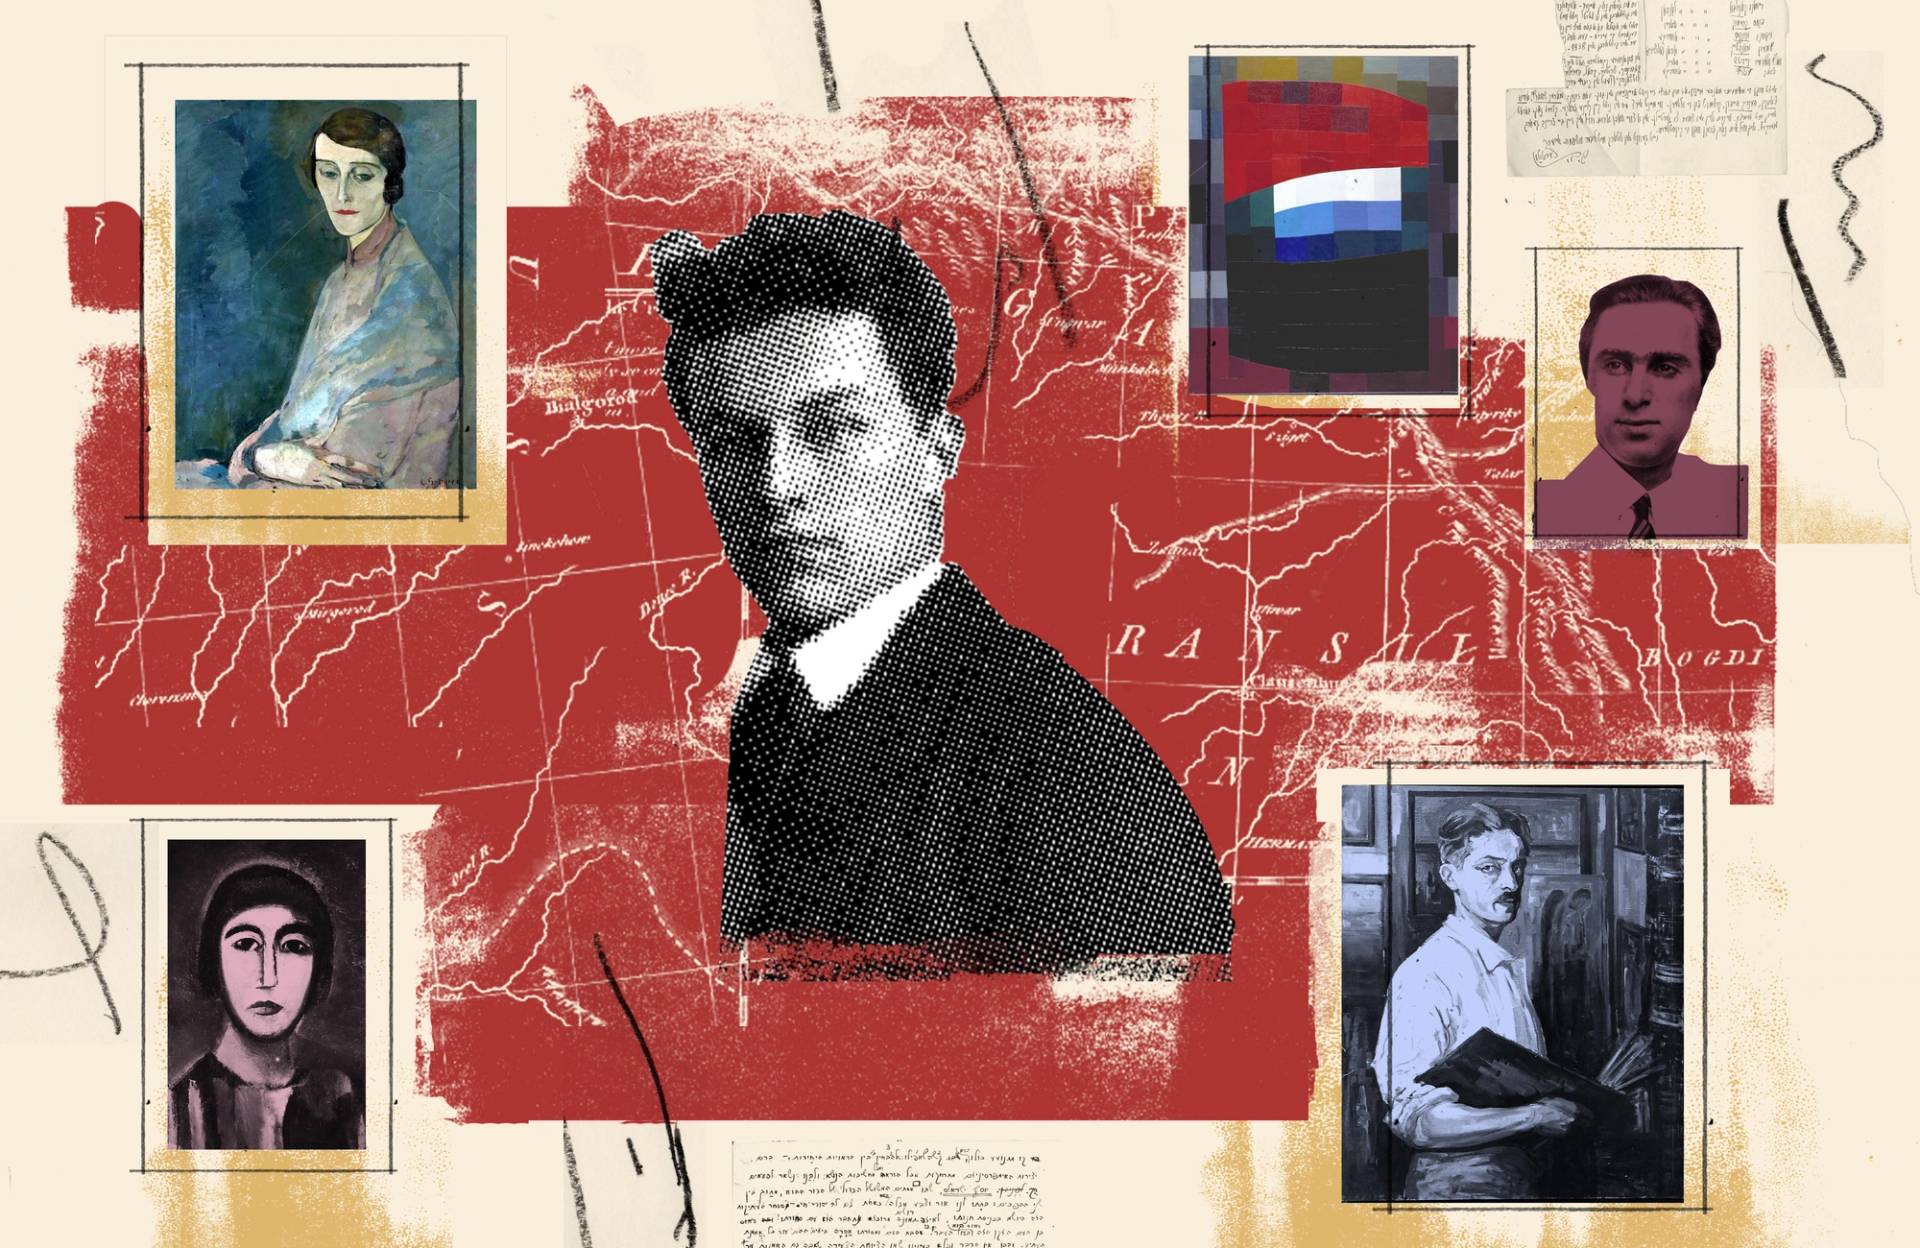 Clockwise from top left: painting by Leopold Gottlieb, 1919 photo of Otto Schneid, painting by Otto Freundlich, photo of Issachar Ryback, Samuel Obodowski-Orjahu self-portrait, and Fega Blumberg self-portrait